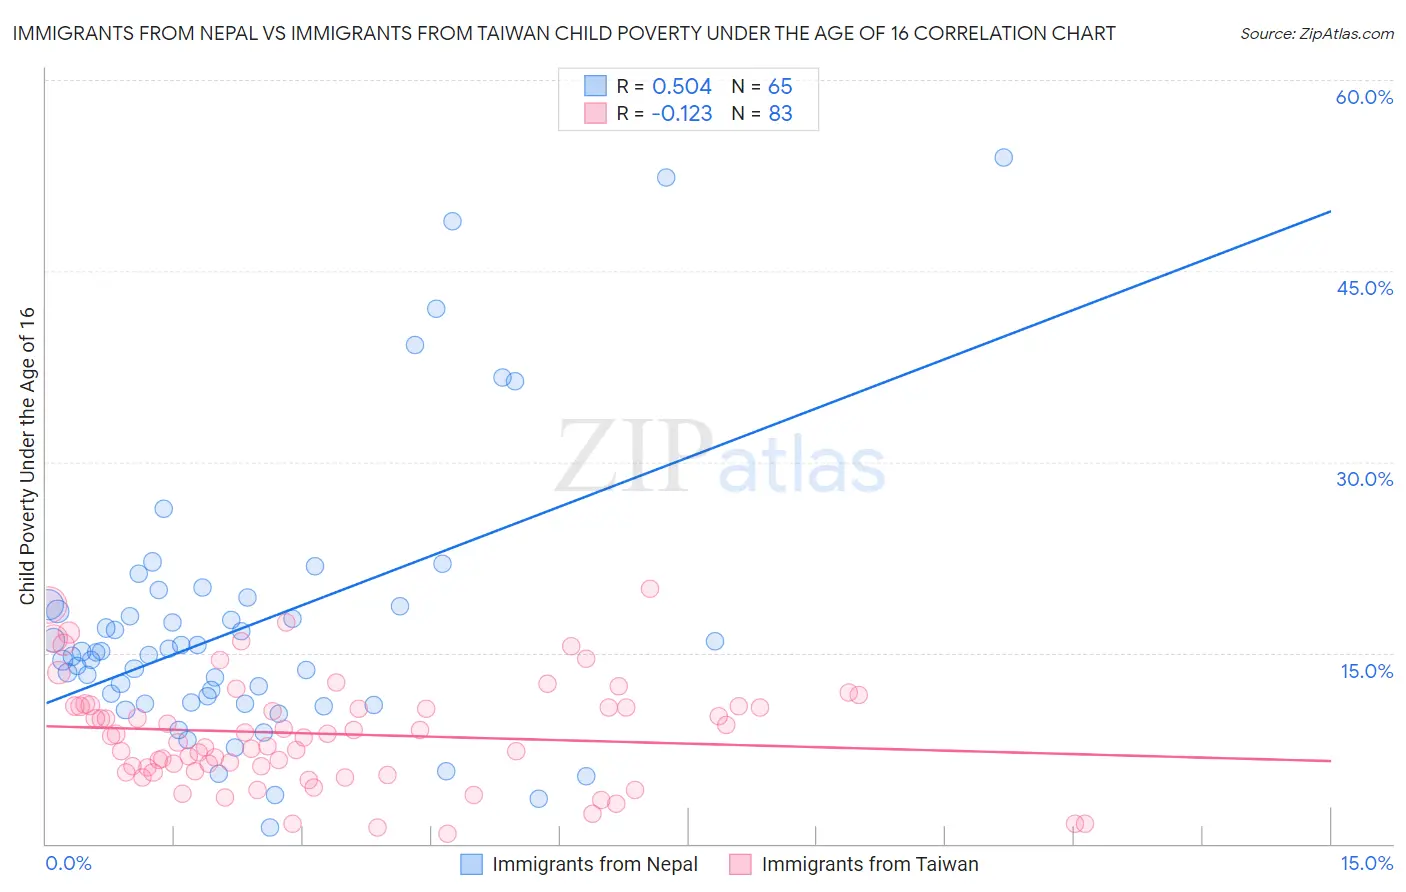 Immigrants from Nepal vs Immigrants from Taiwan Child Poverty Under the Age of 16